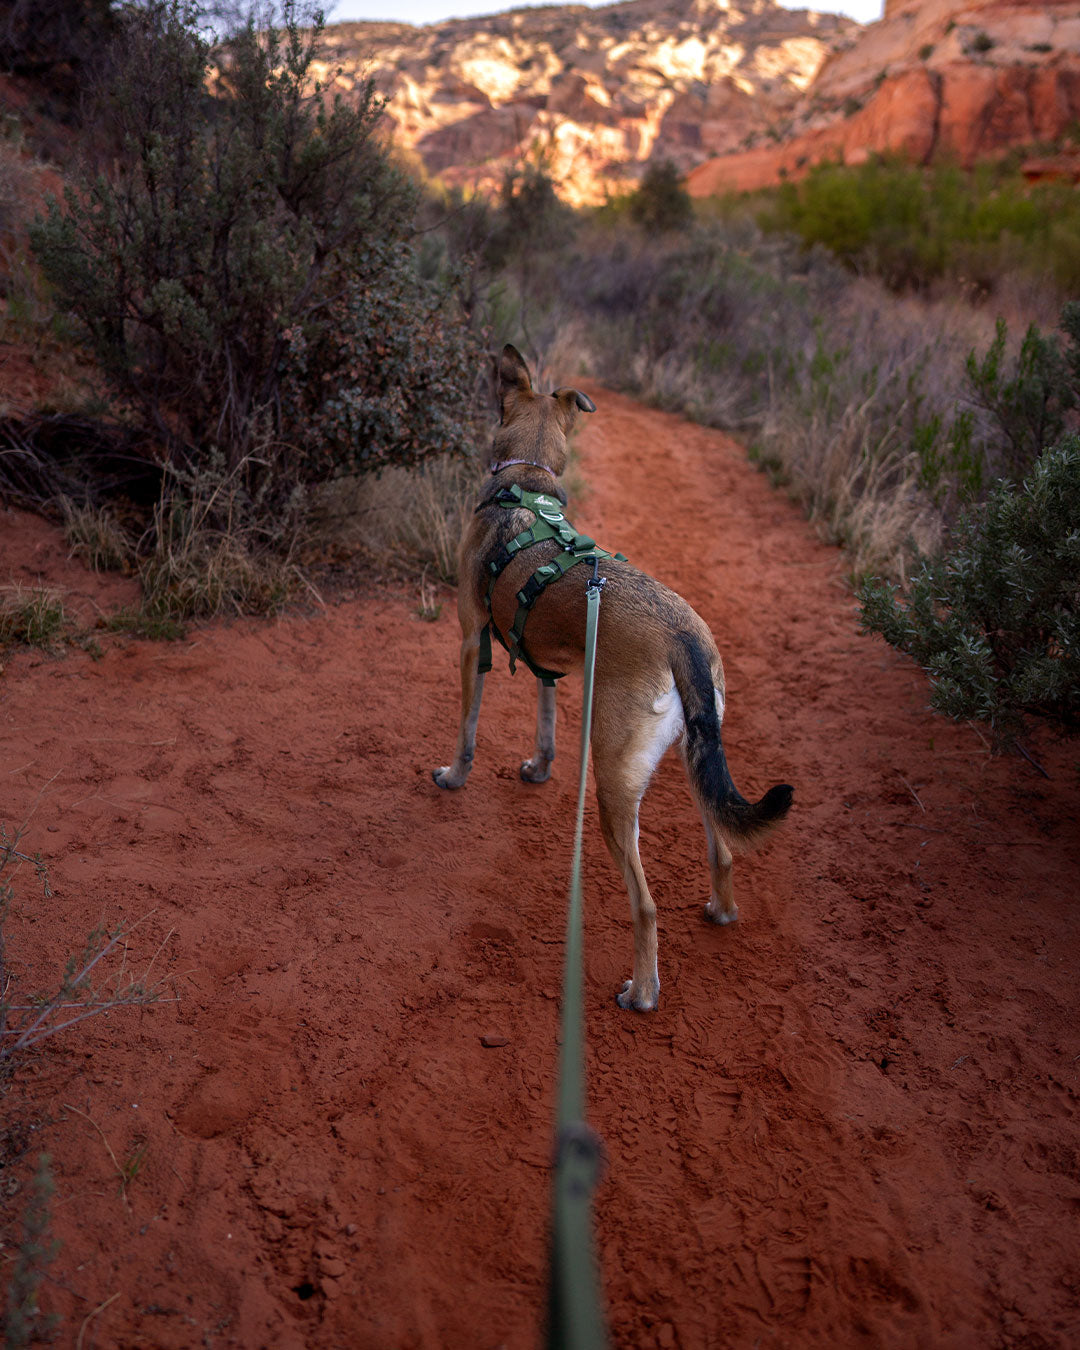 wildlikeivy wearing the Canyon Light Extended harness in Moss Green in red dirt